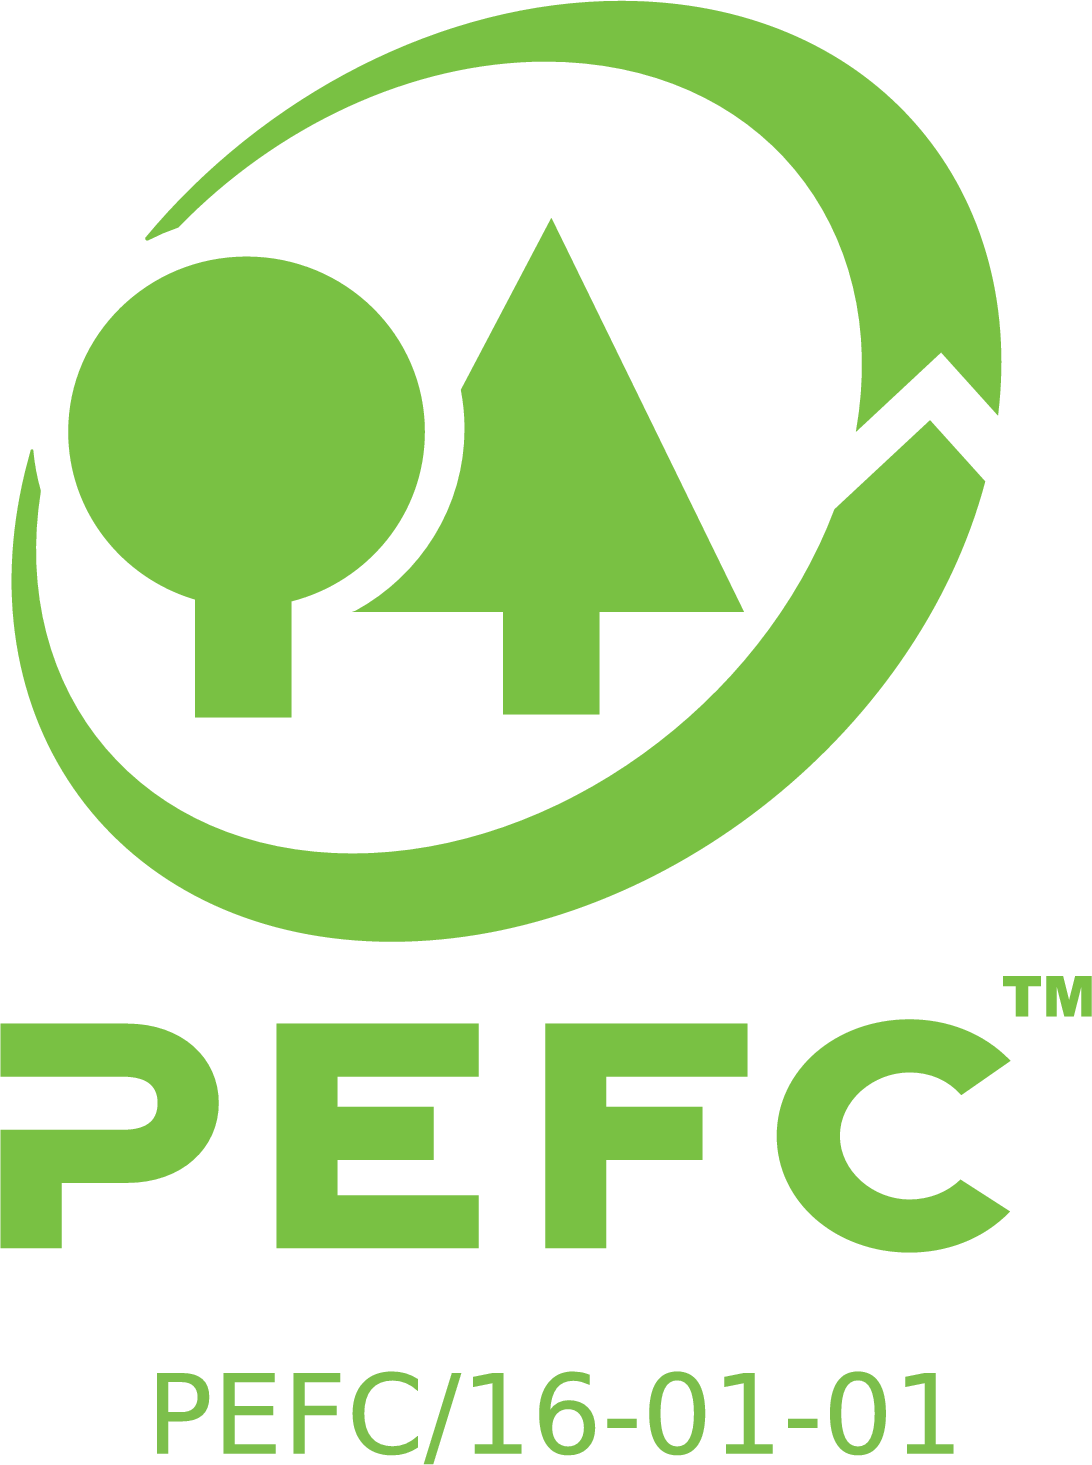 Cirtification Logo - PEFC Homepage. The world's largest forest certification organisation